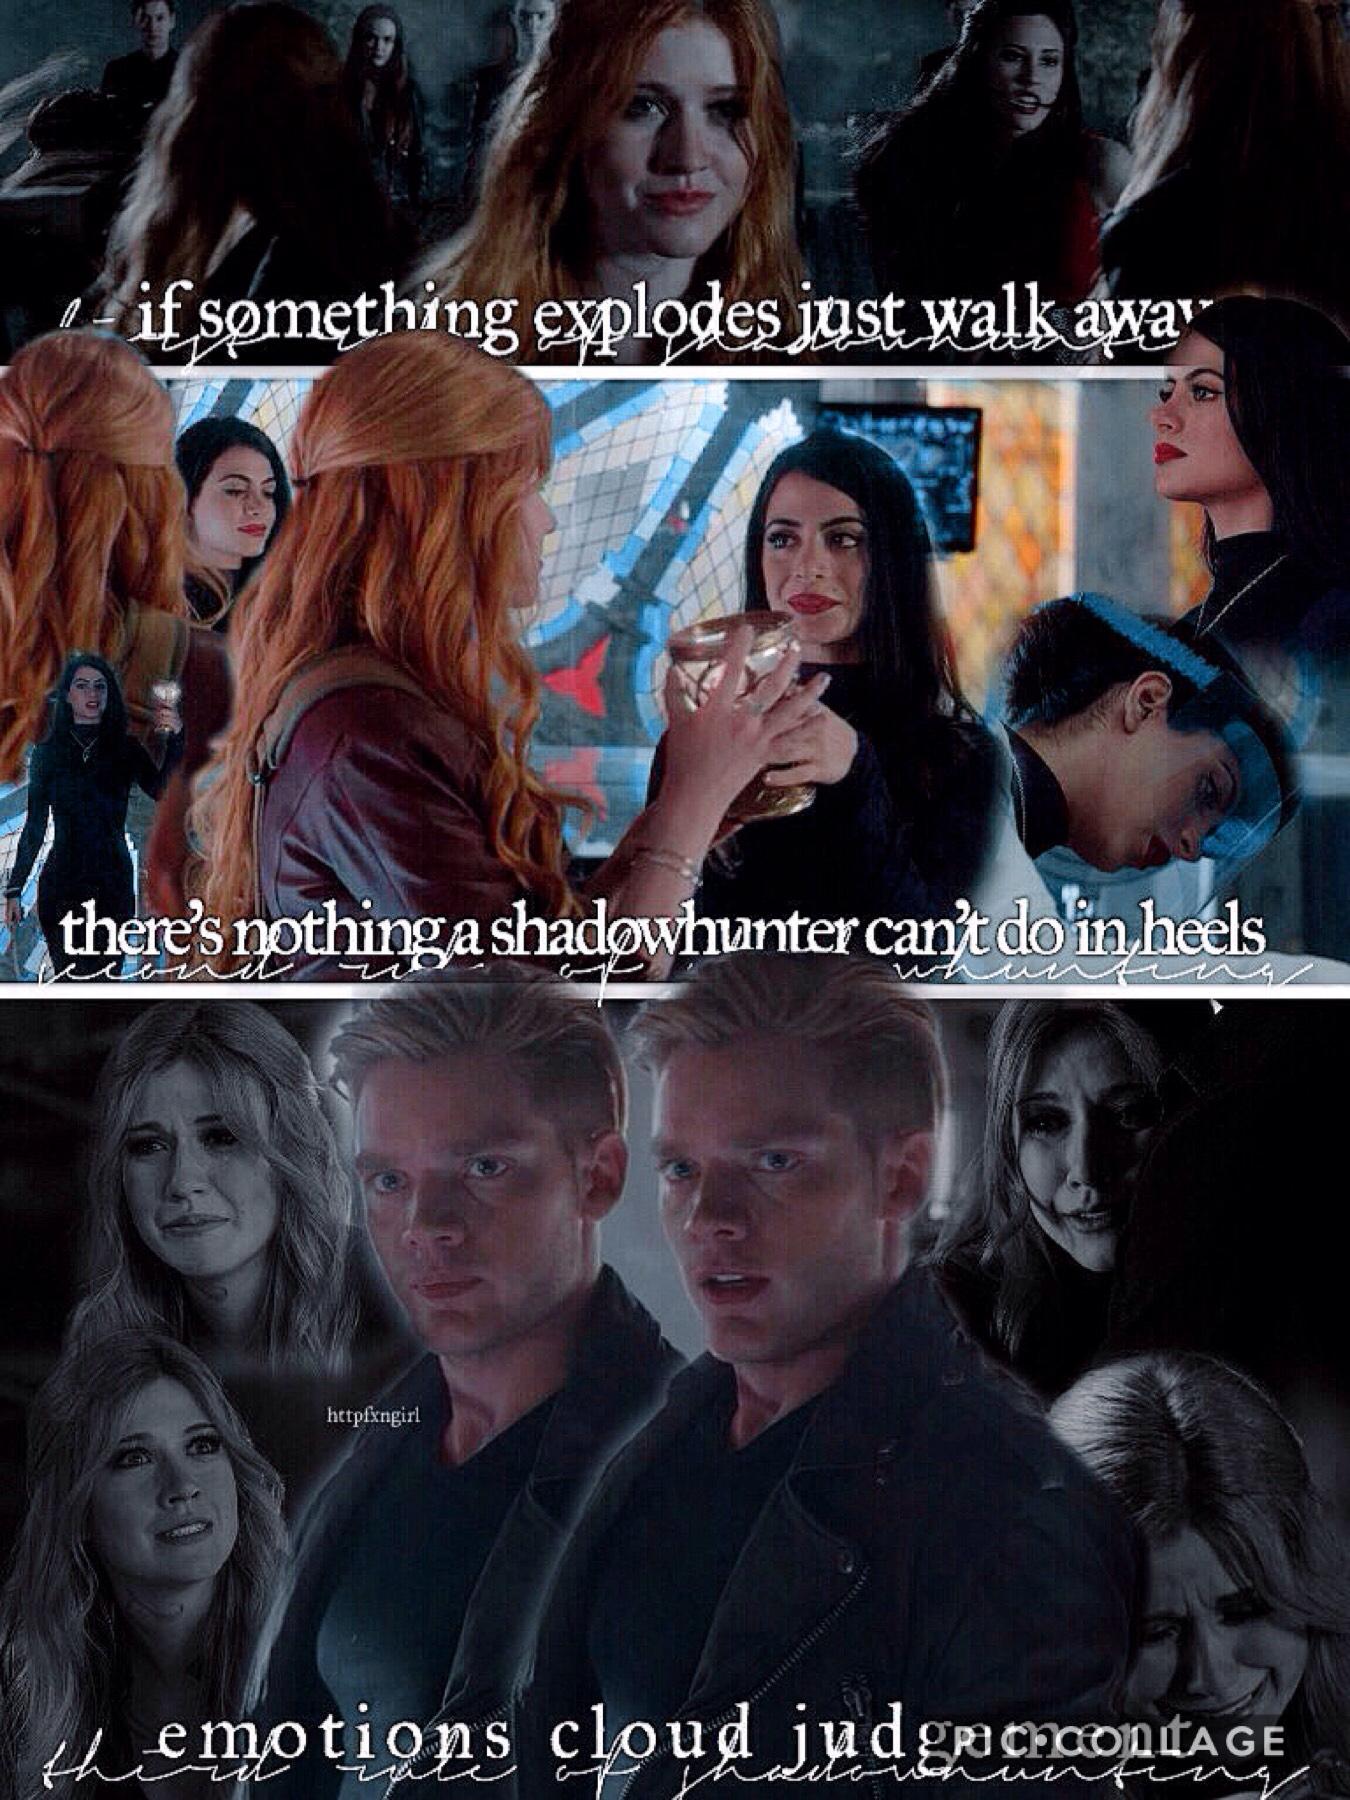 season 1 episode 8 — bad blood ➰
I hate this but I like it??? I'm so confused ugh 😣
almost done season 1 though 😊 that means the theme is 1/3 of a way there!!! 
q// favourite season 1 episode? 
a// "malec" or "this world inverted"